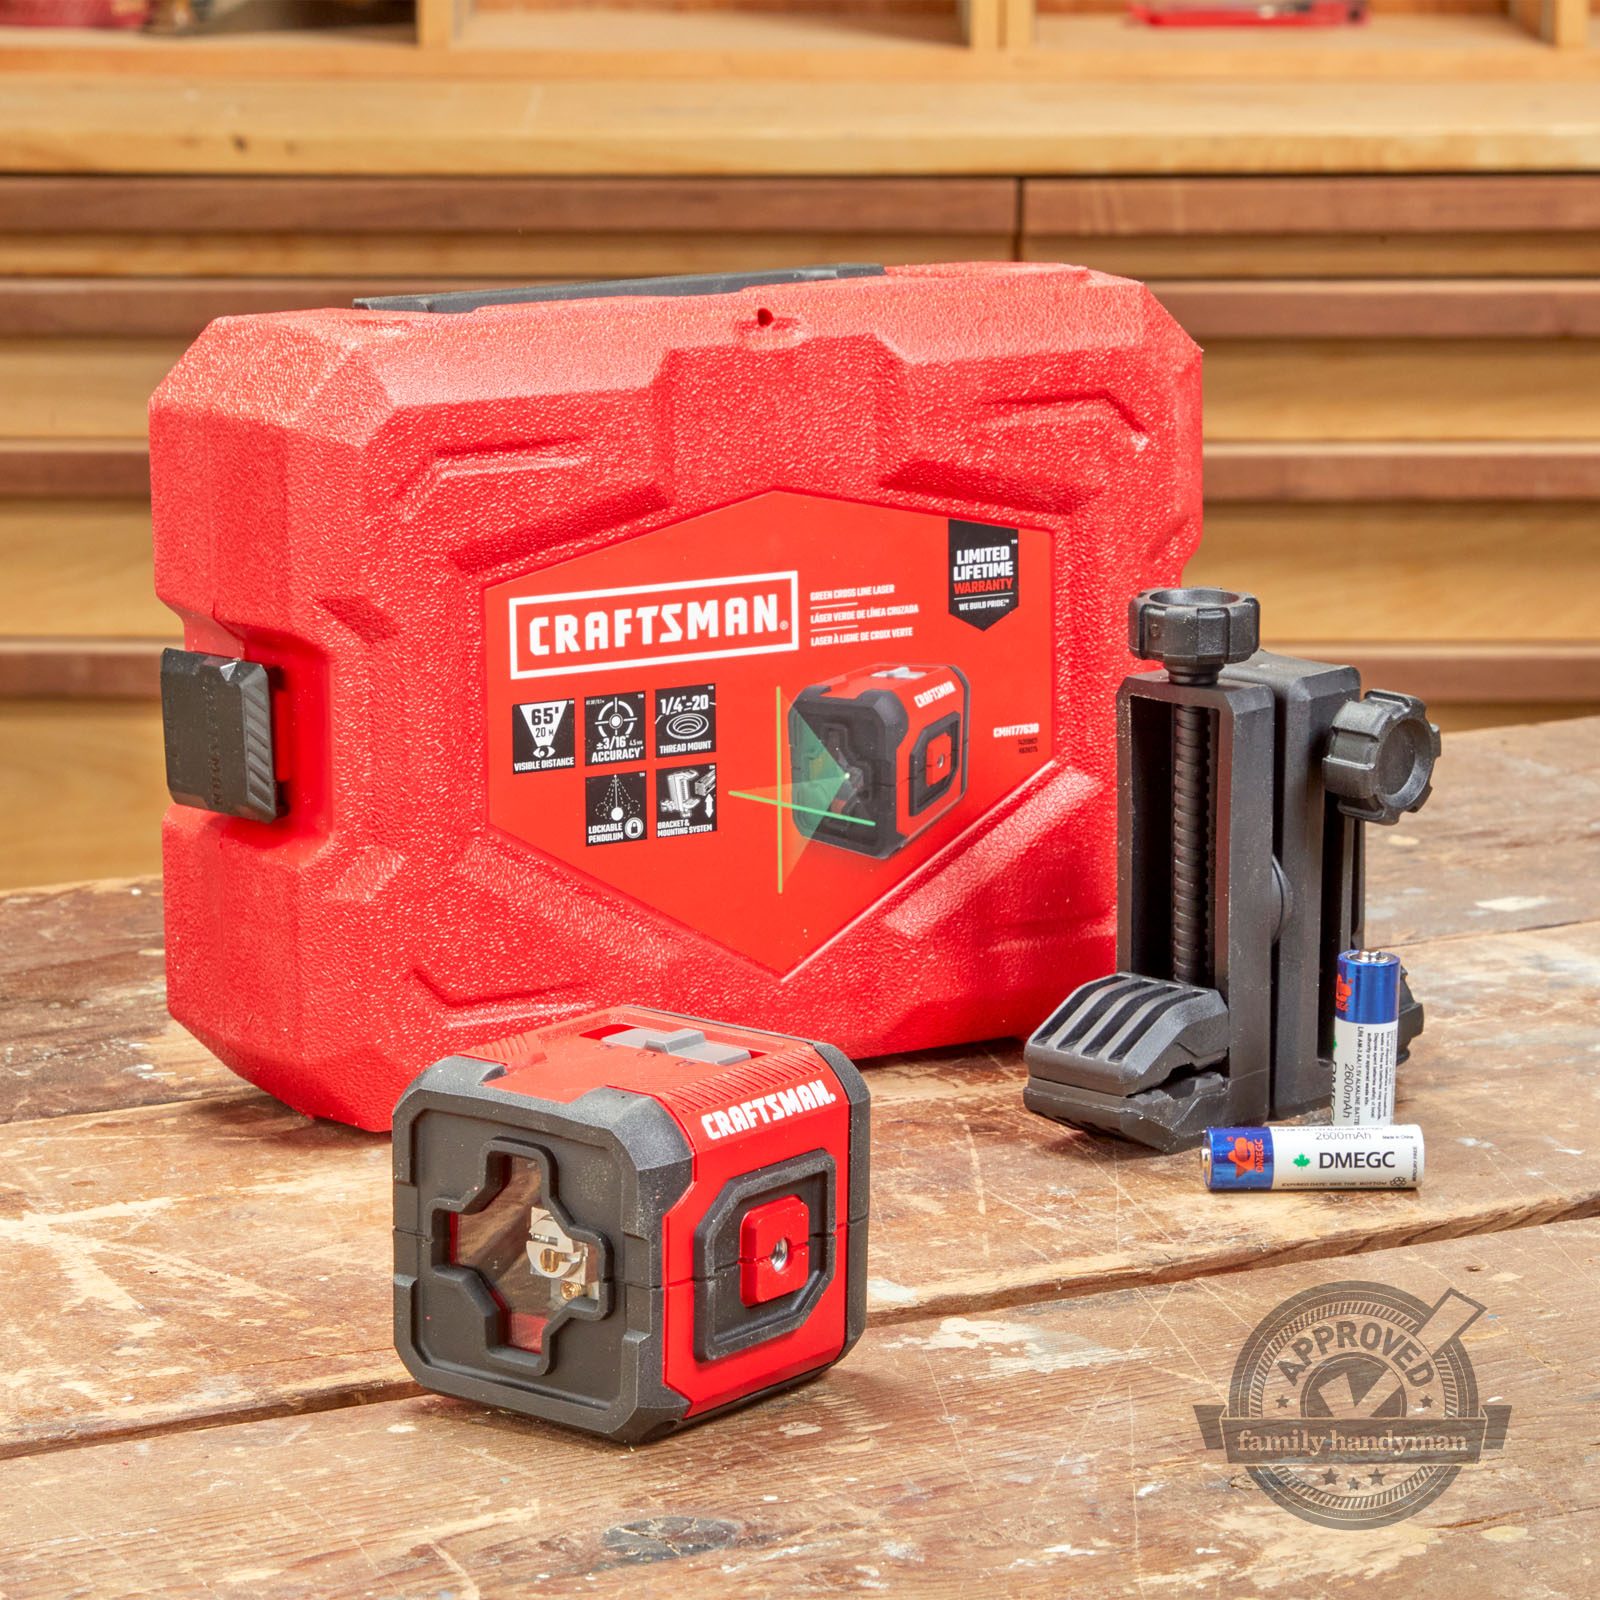 The Family Handyman Approved Craftsman Crossline Laser Level Is a Valuable Addition to Your Toolbox